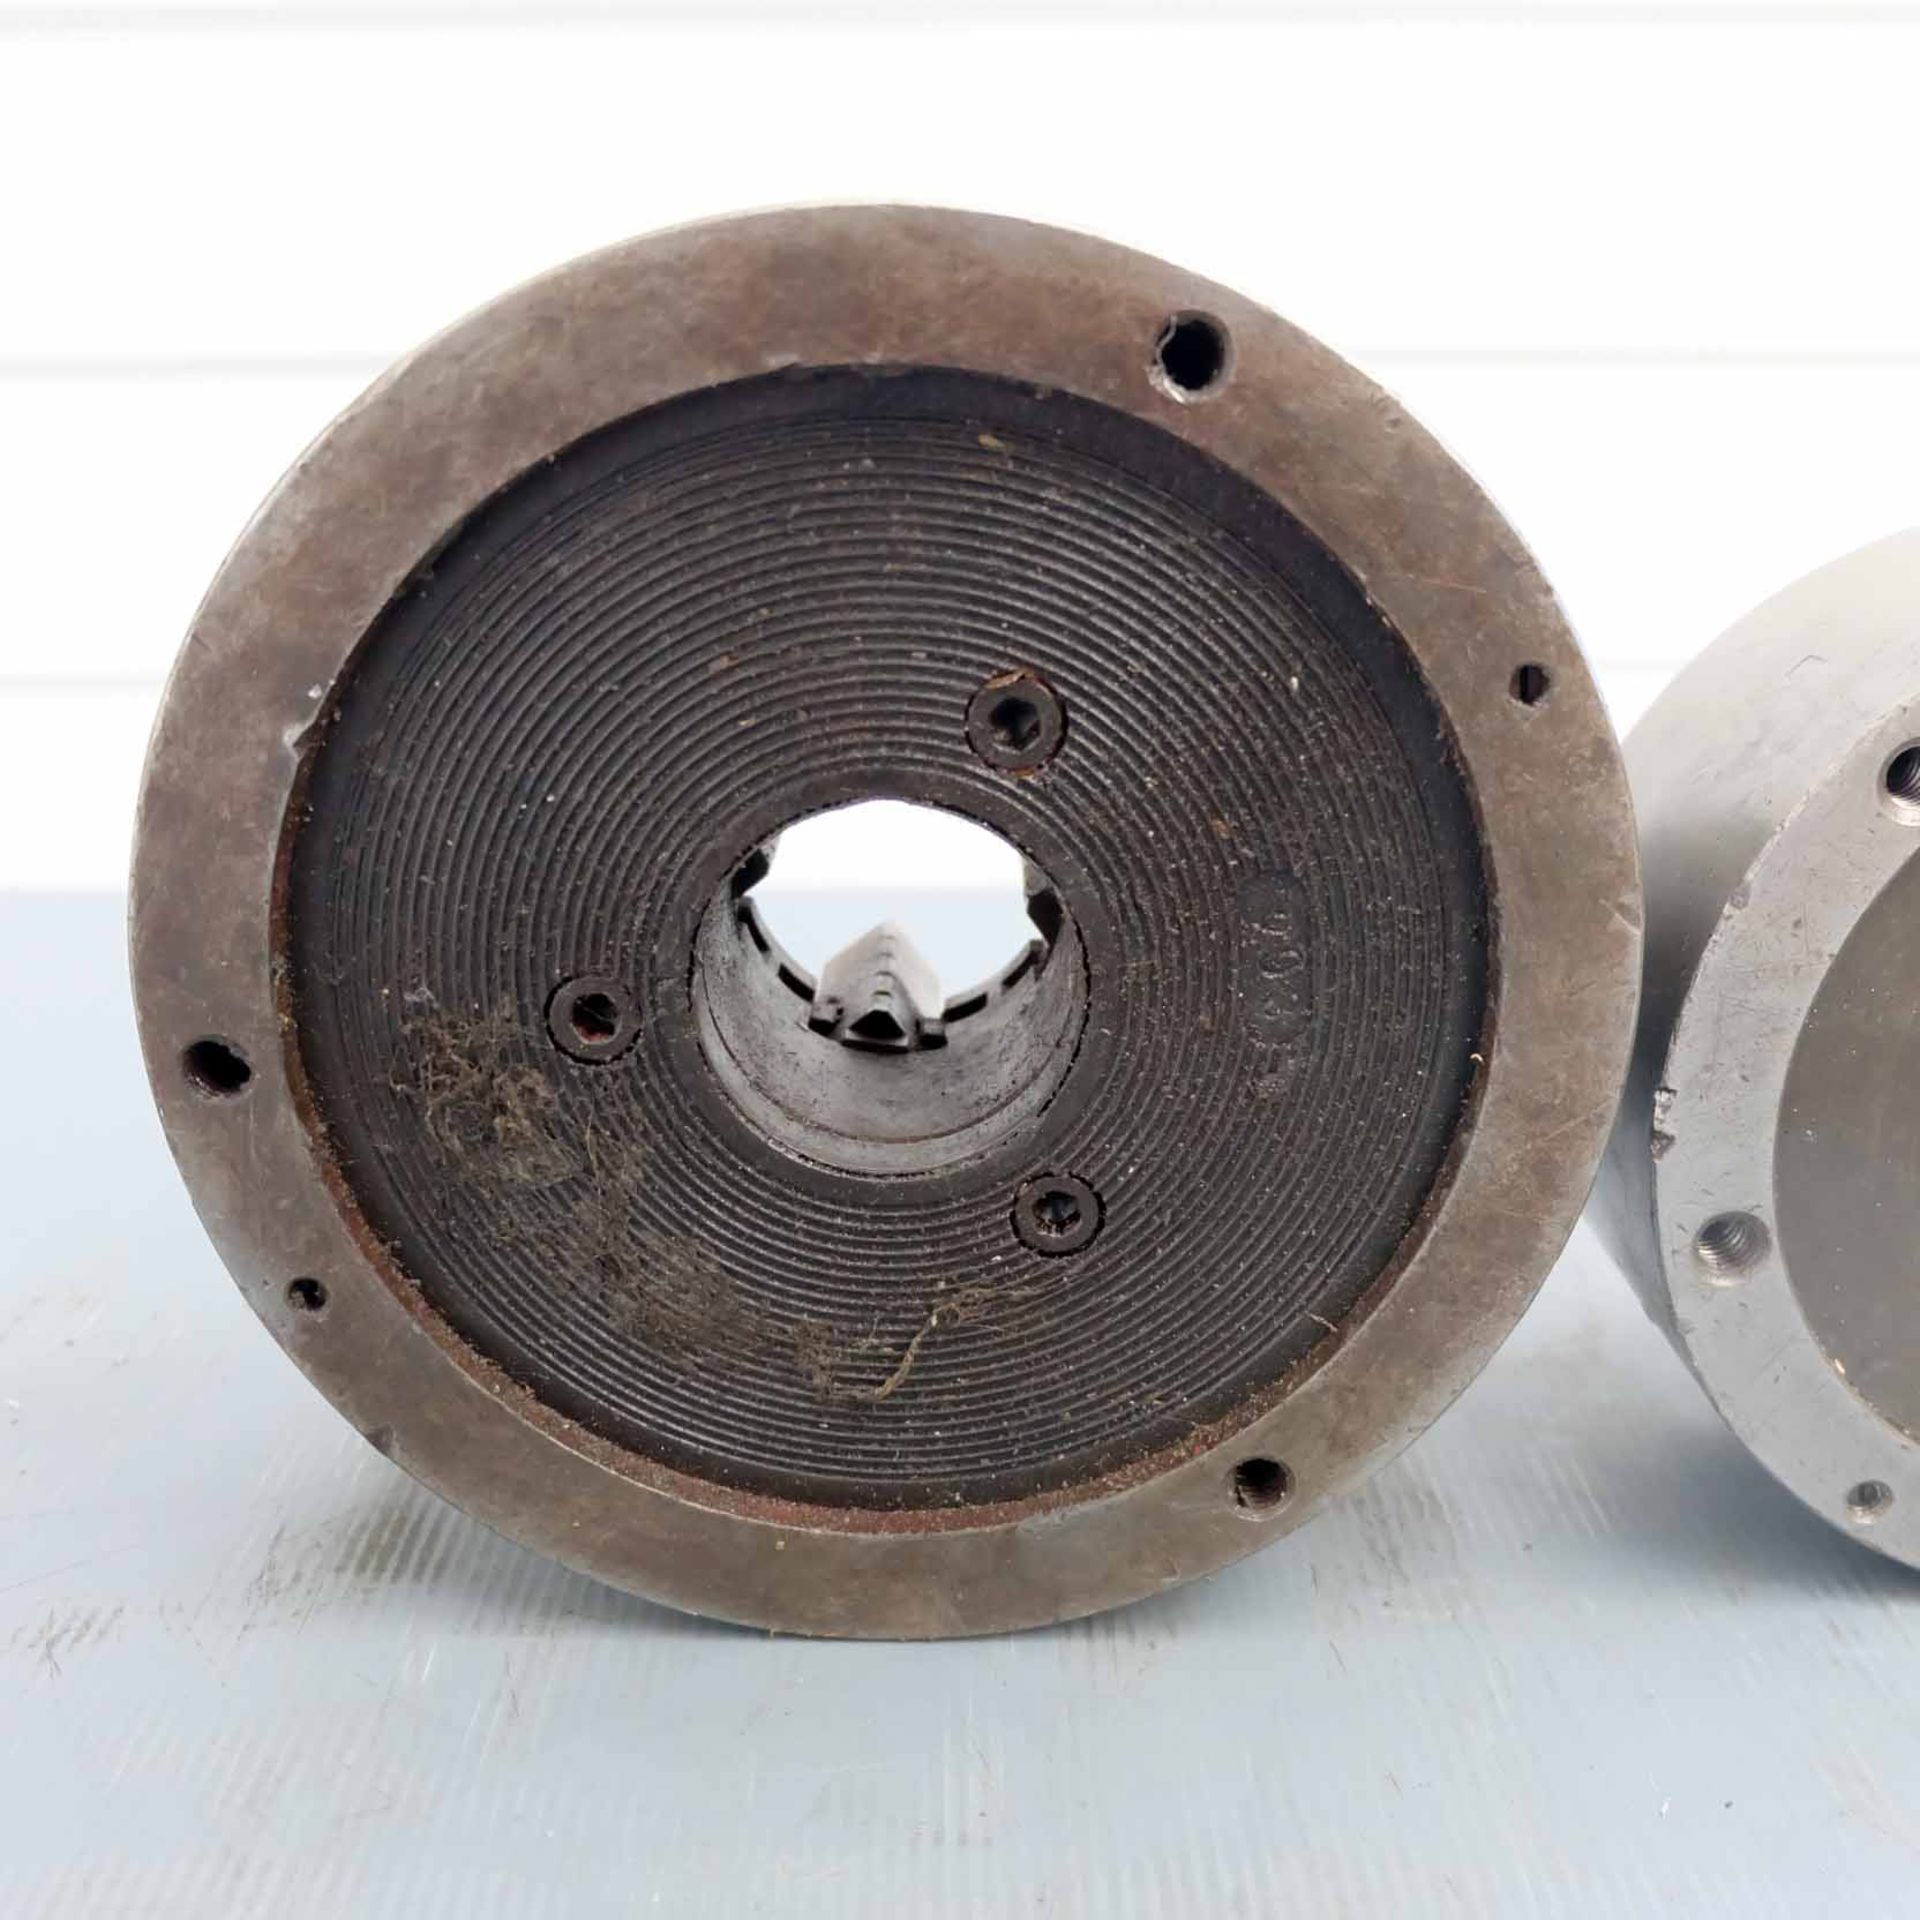 Two Self Centring 4 Jaw Scroll Chucks. Sizes 200mm & 160mm Diameter. - Image 6 of 7